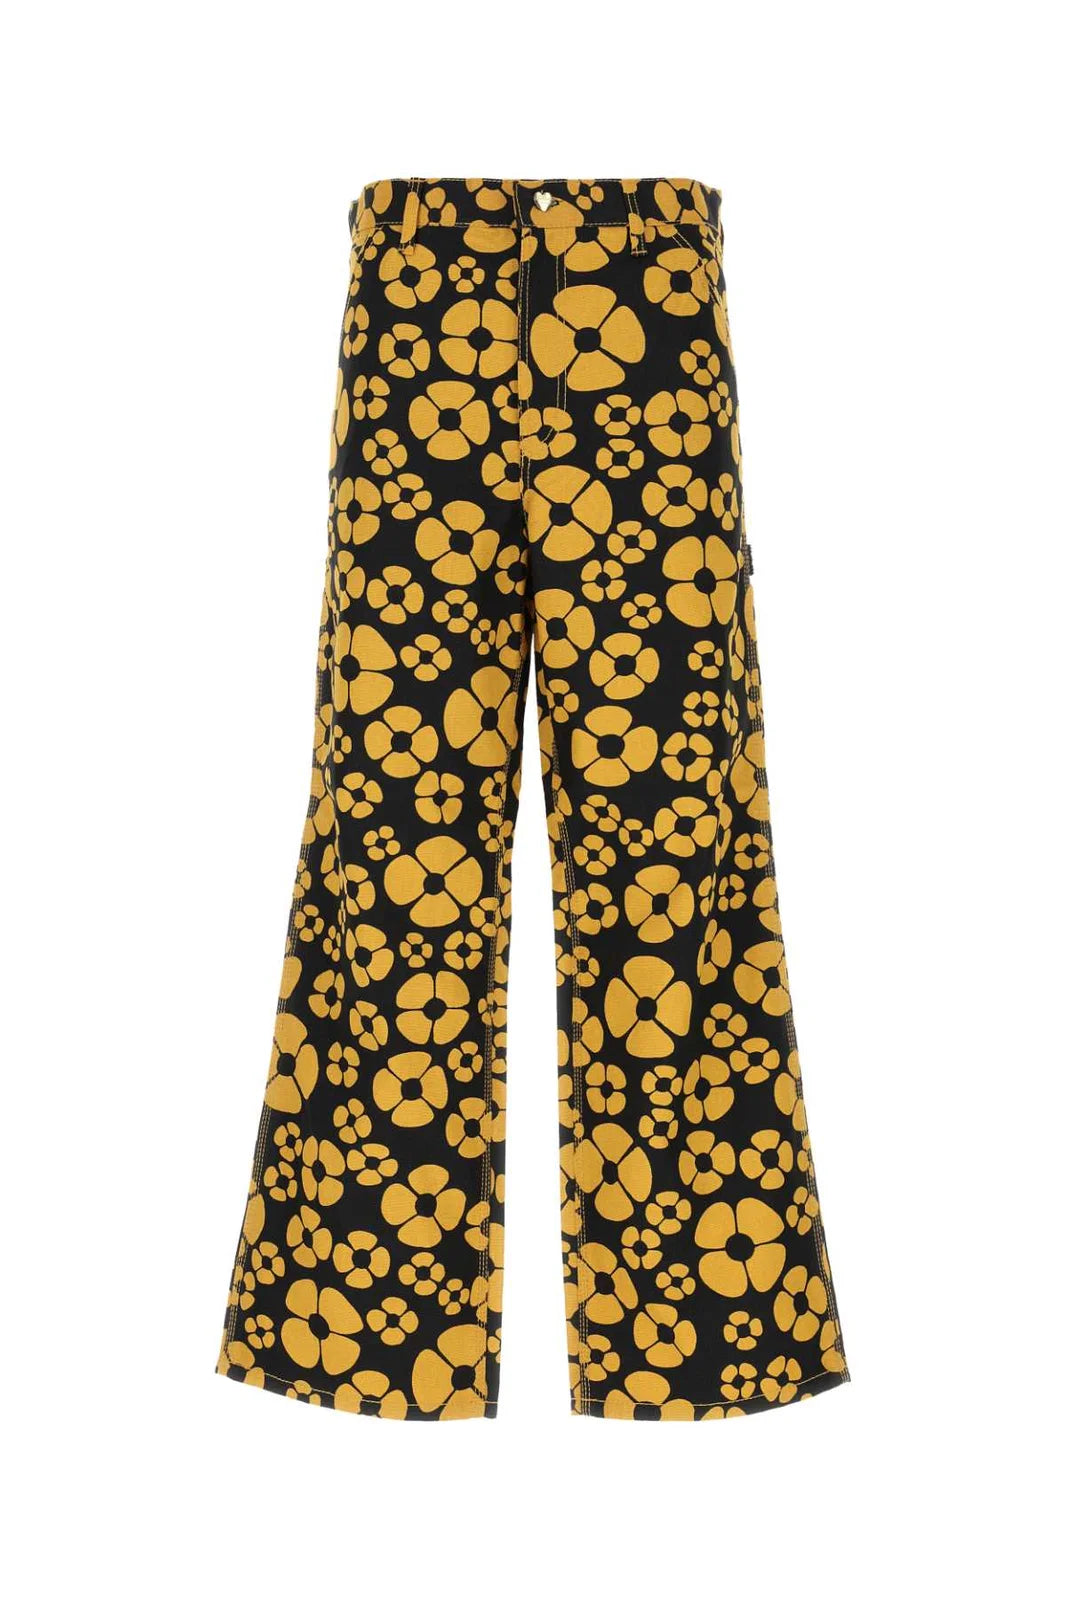 MARNI X CARHARTT FLORAL PRINTED JEANS YELLOW